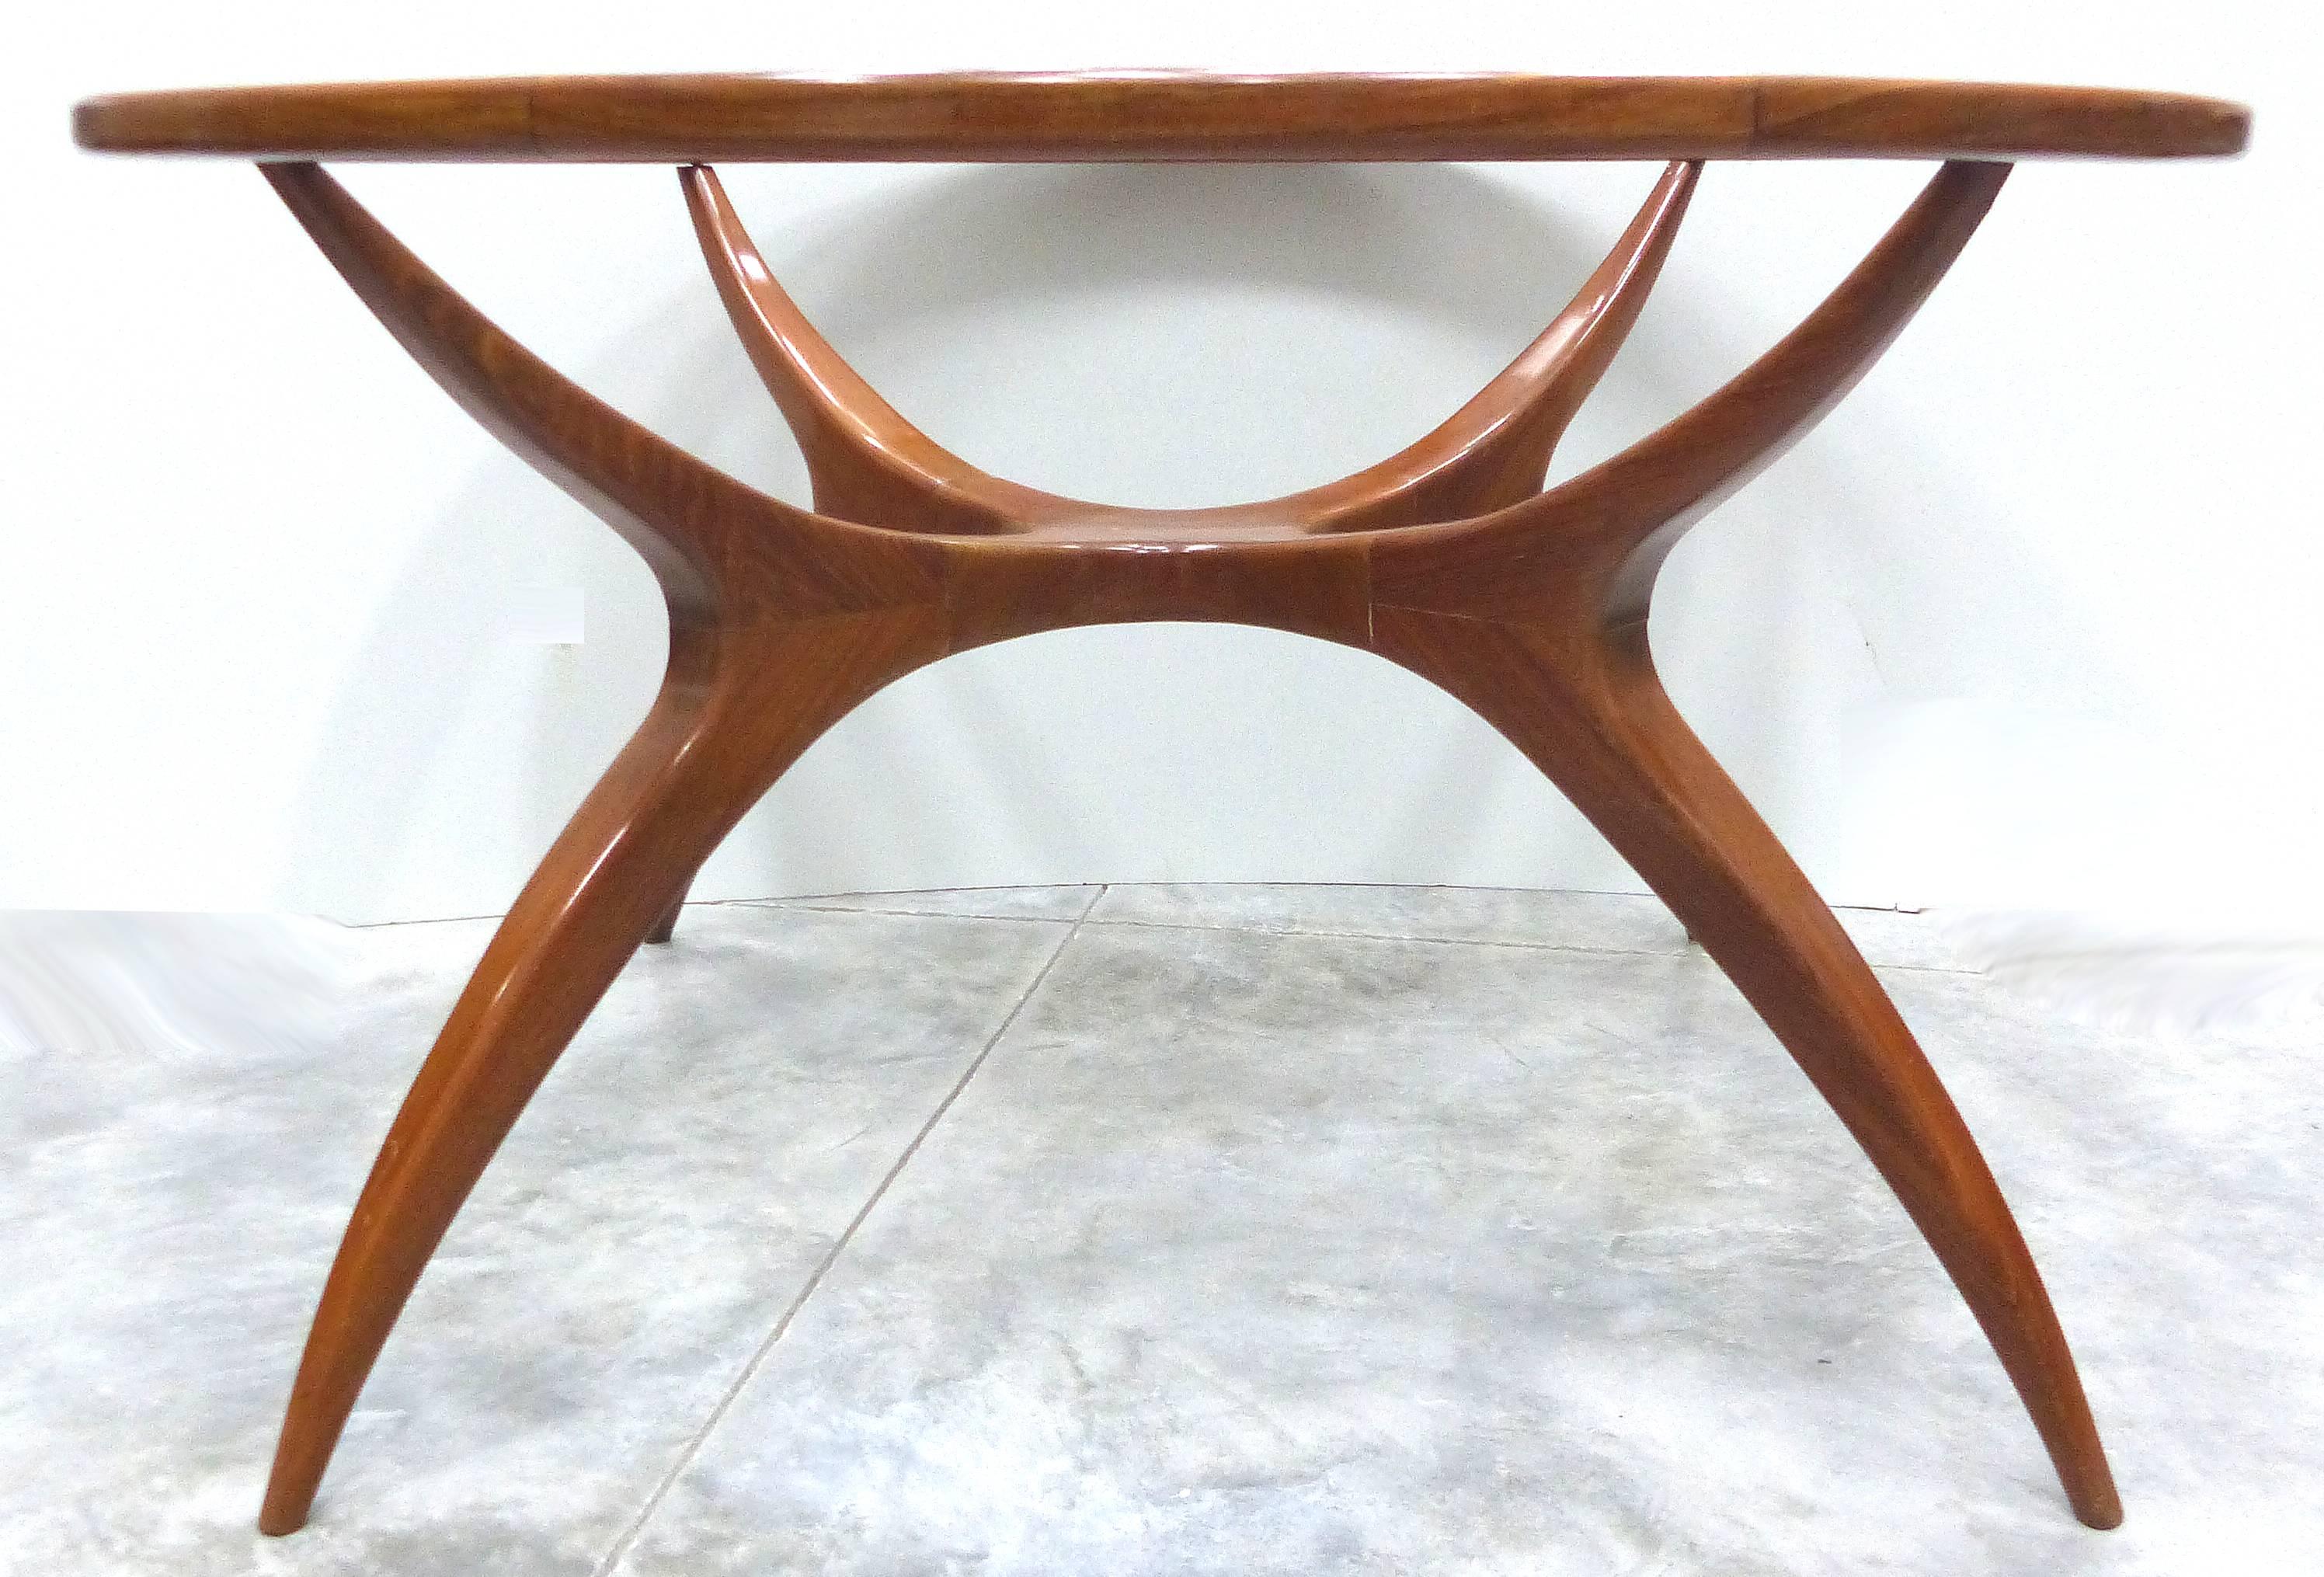 Offered is a sculptural and organic round table designed by Brazilian designer Giuseppe Scapinelli. Dating to the 1960s, the table is made of Peroba de Campos  wood. The table will serve as either a small dining table or a centre table and is fitted